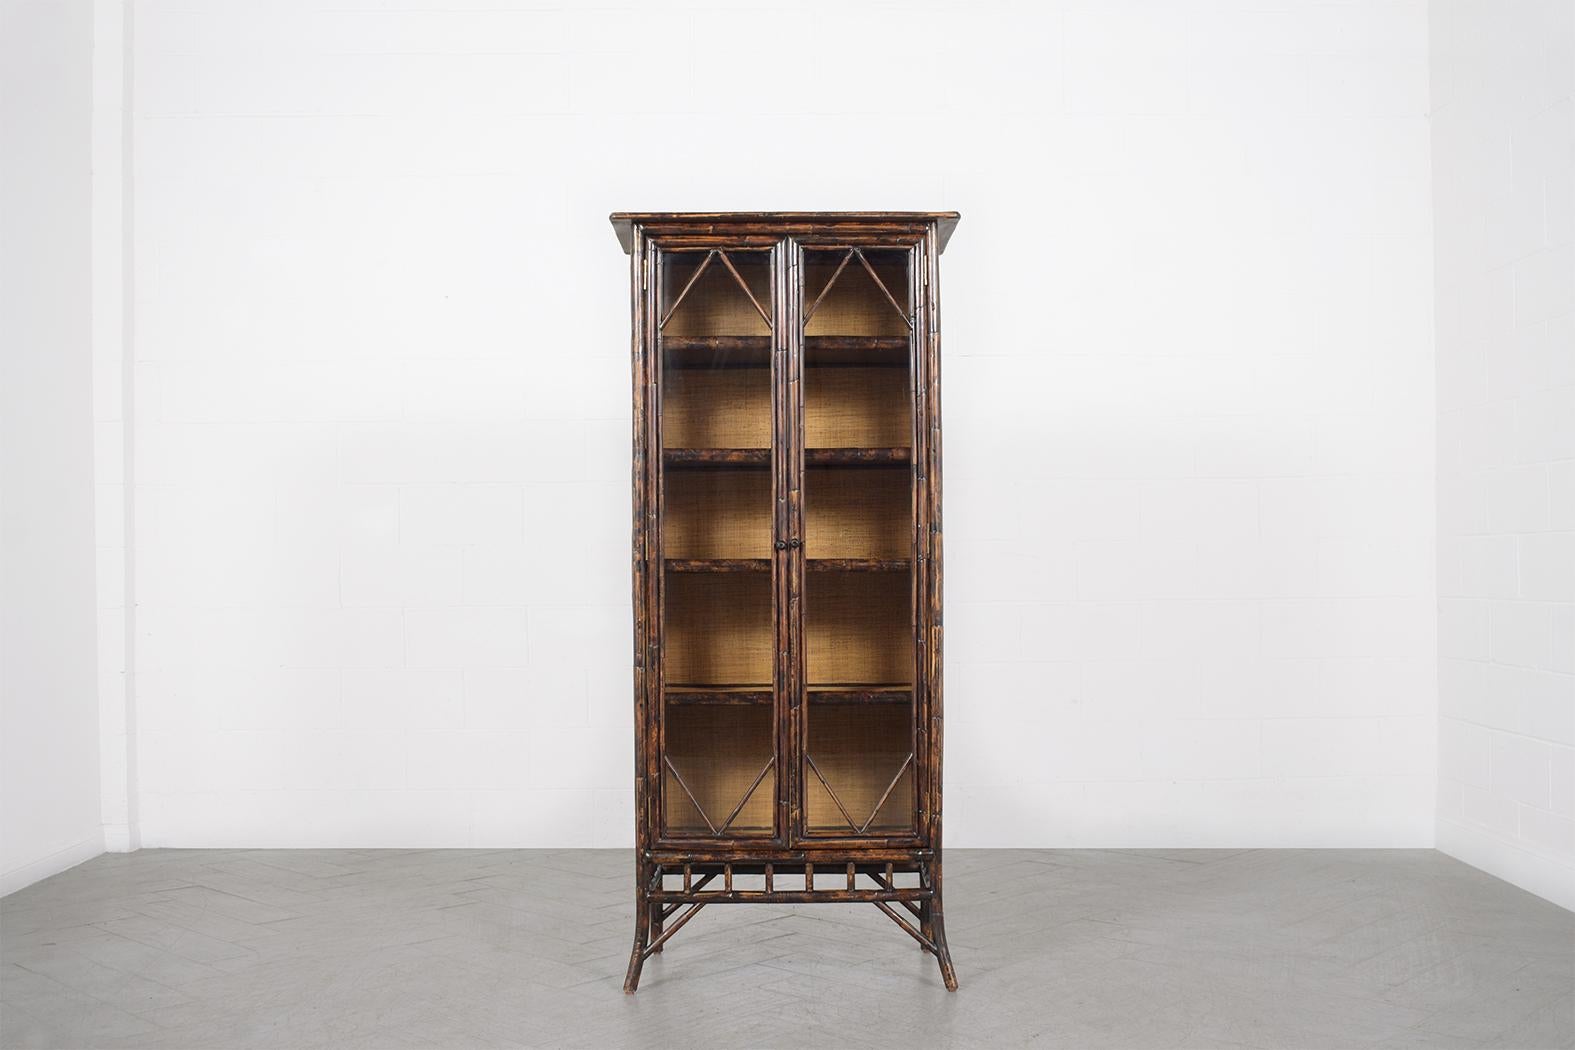 An extraordinary vintage 1980s Bohemian cabinet in great condition is beautifully hand crafted out of bamboo wood cane and glass and has been completely restored and finished by our expert professional craftsman team in the house. This vintage